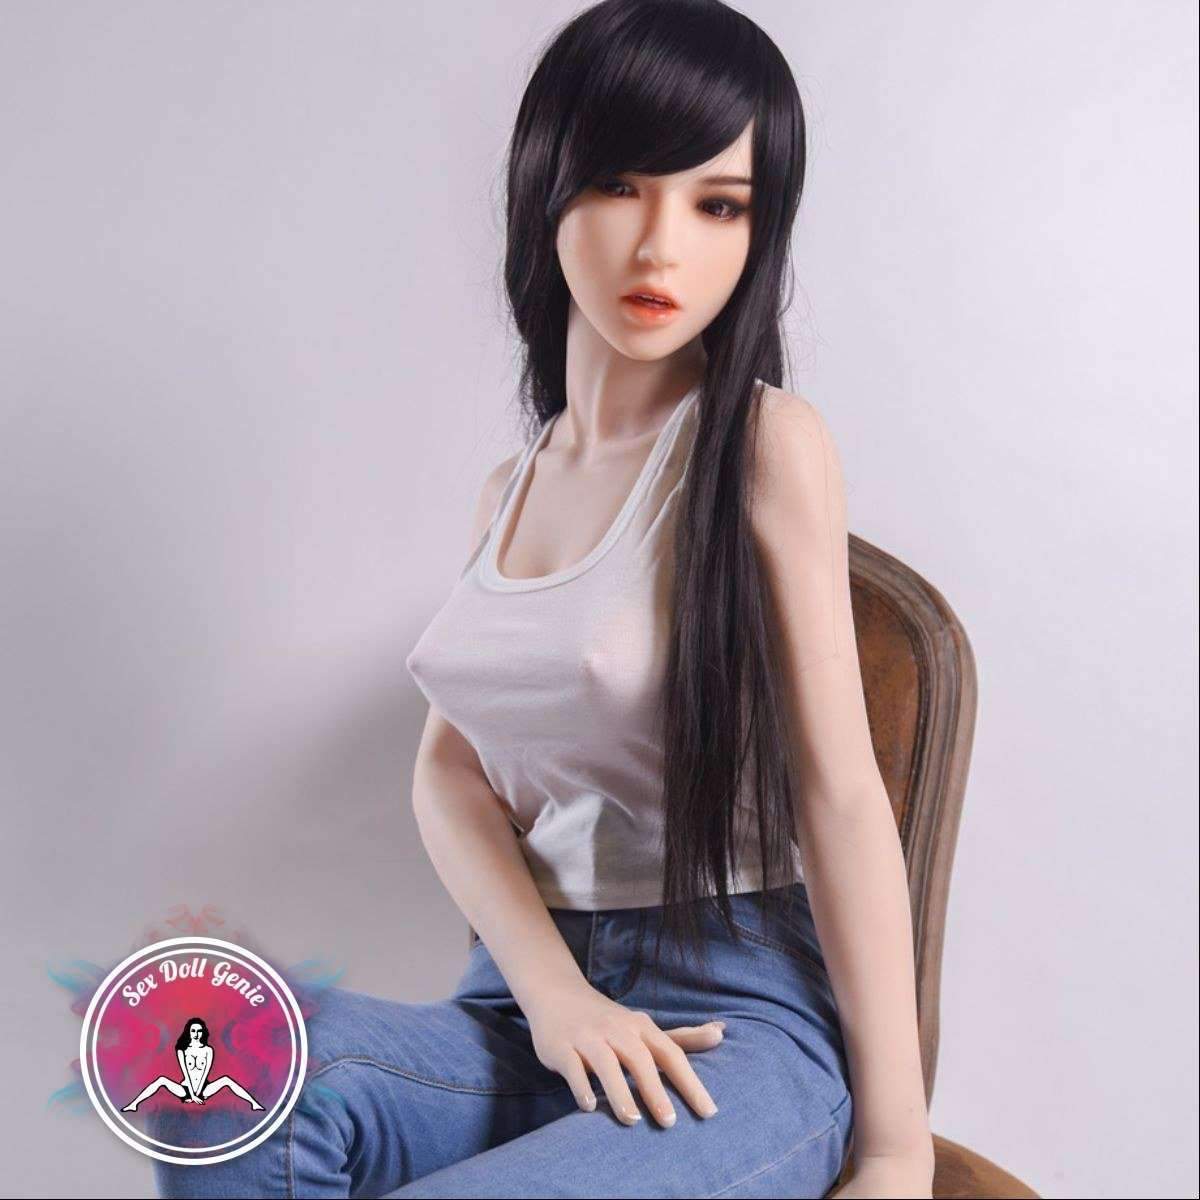 DS Doll - 163Plus - Kayla Head - Type 2 D Cup Silicone Doll-1